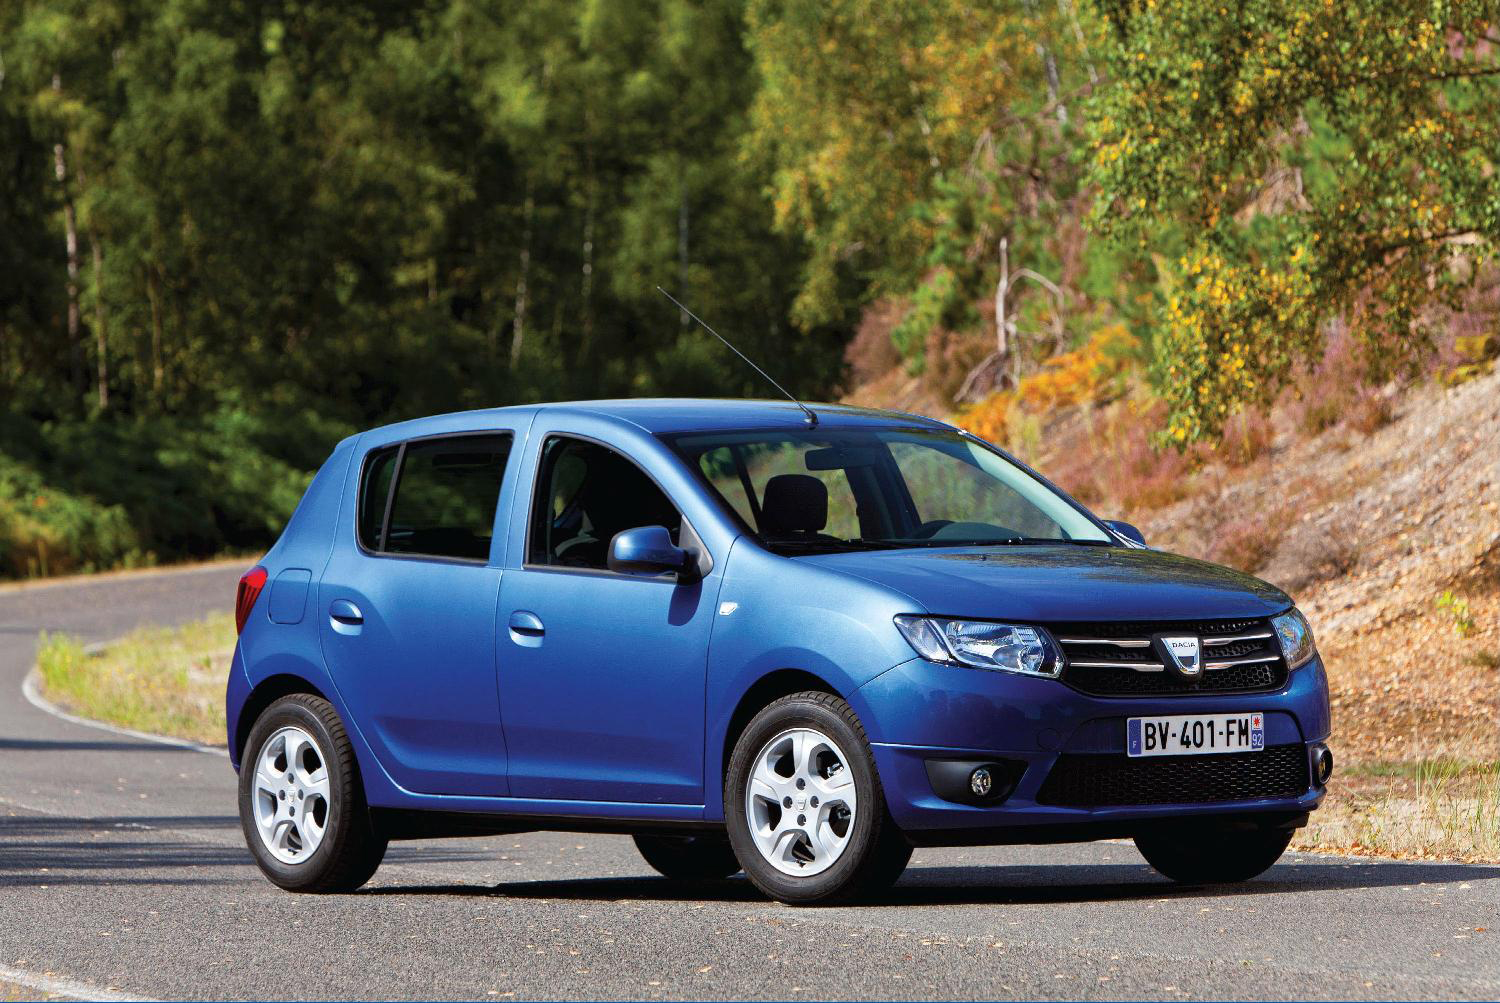 The Dacia models revealed at the Paris Motor Show 2012